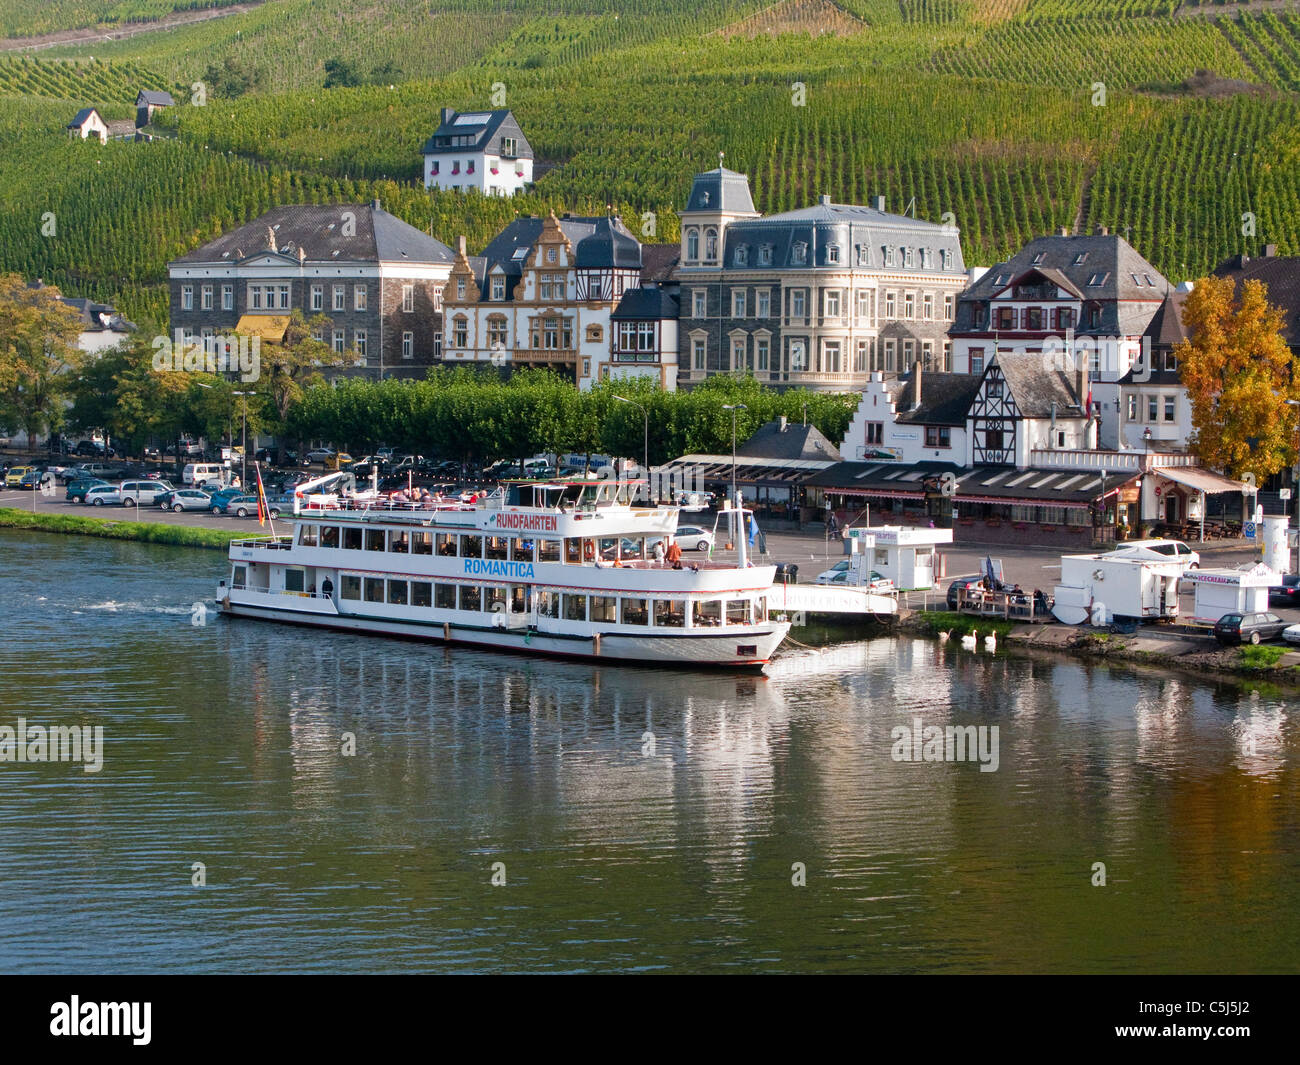 Fahrgastschif am Moselufer, Traben-Trarbach, Mosel, Tourist boat at the riverbank, Moselle Stock Photo